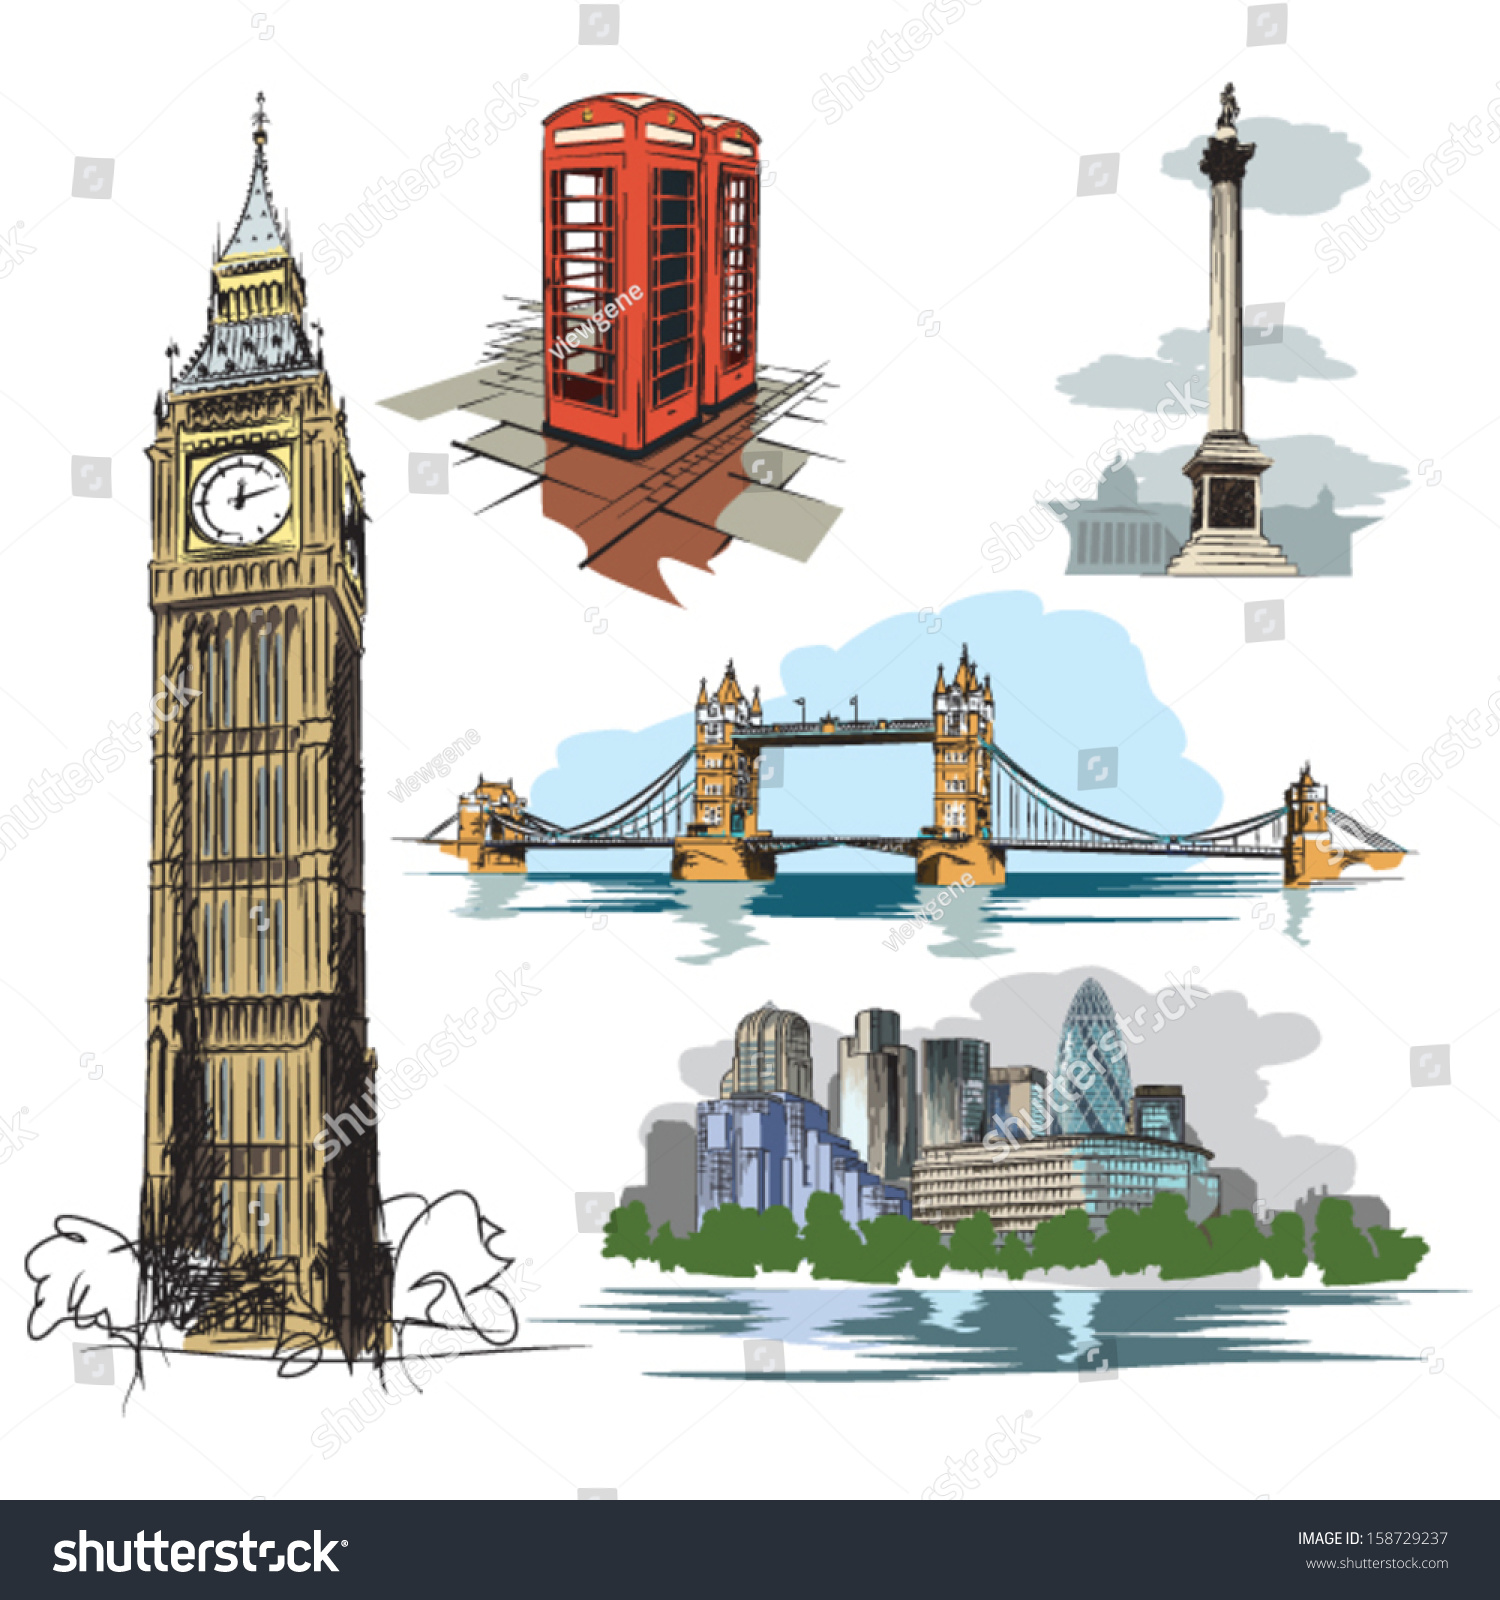 clipart packages uk - photo #23